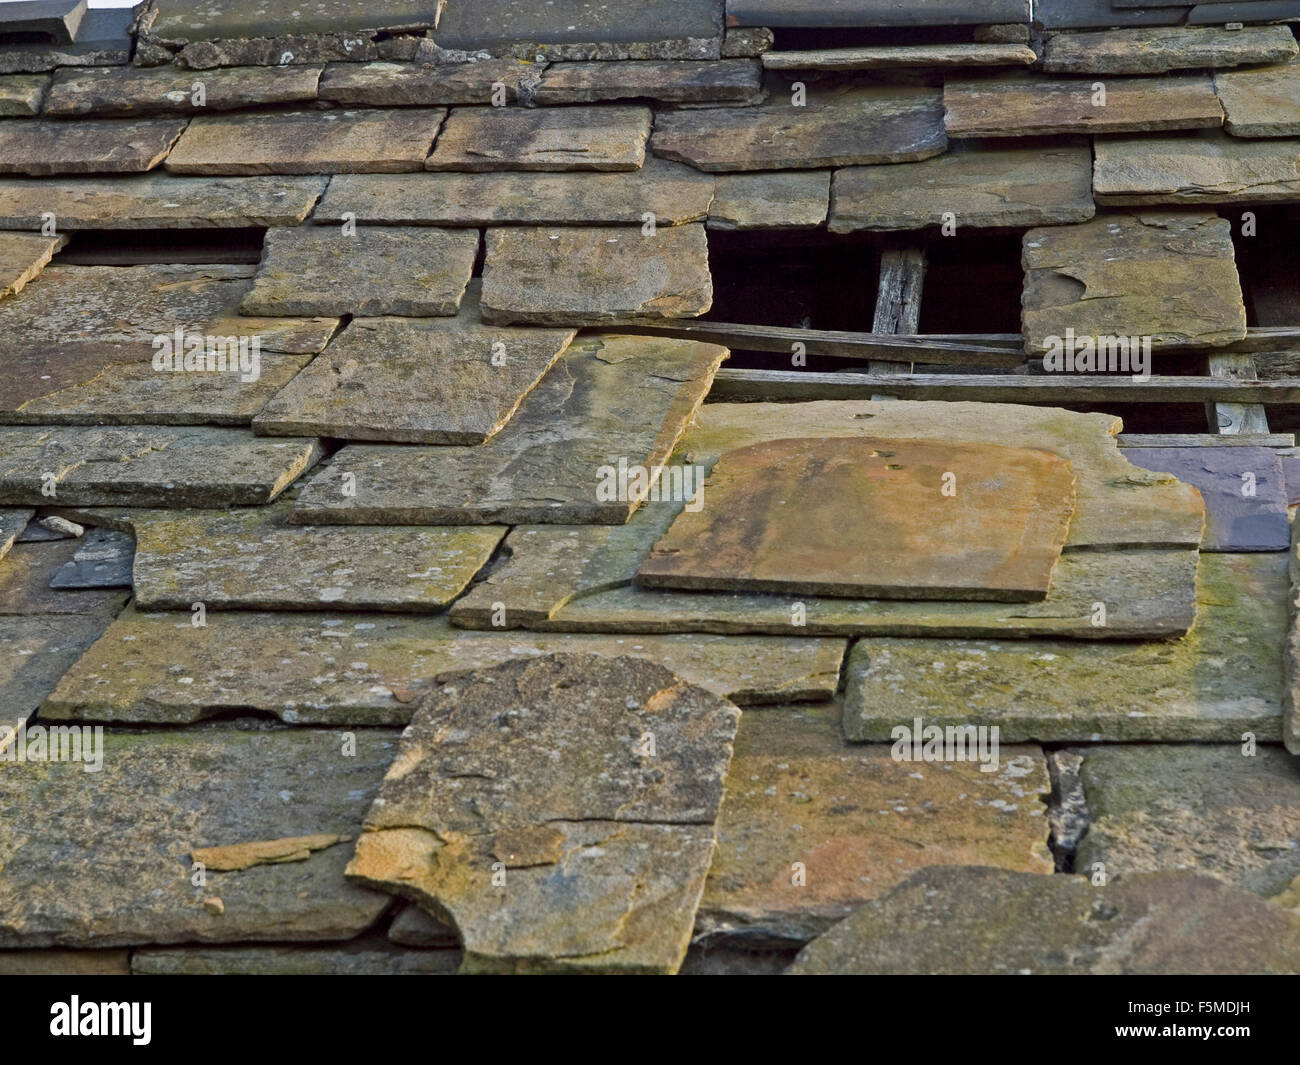 Stone tile roof in need of repair Stock Photo